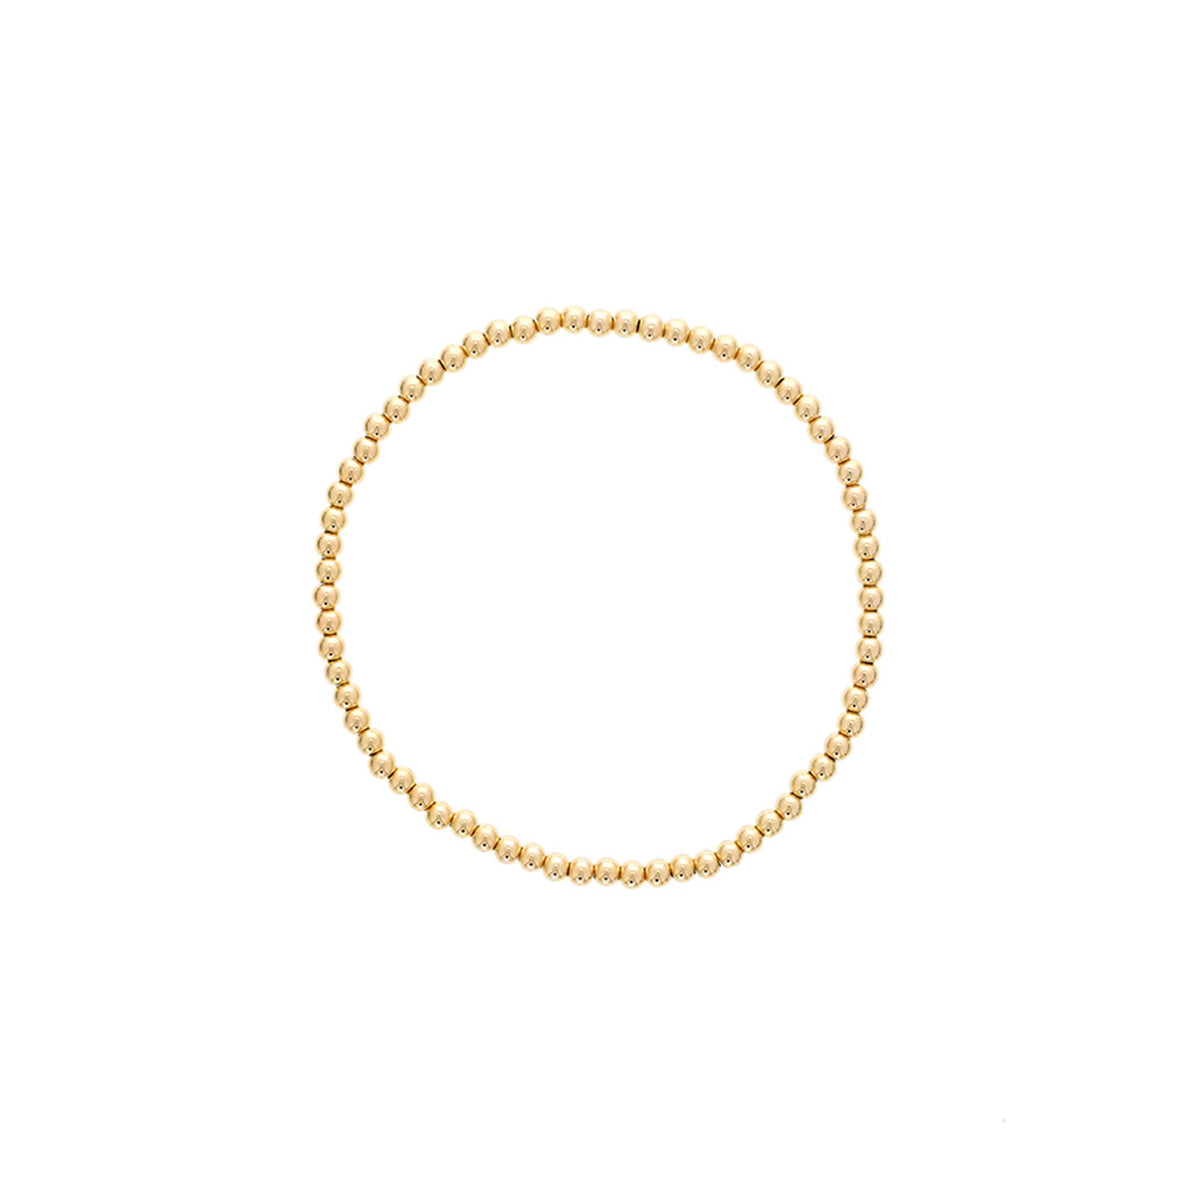 Gold Filled Yellow Gold Bead Bracelet